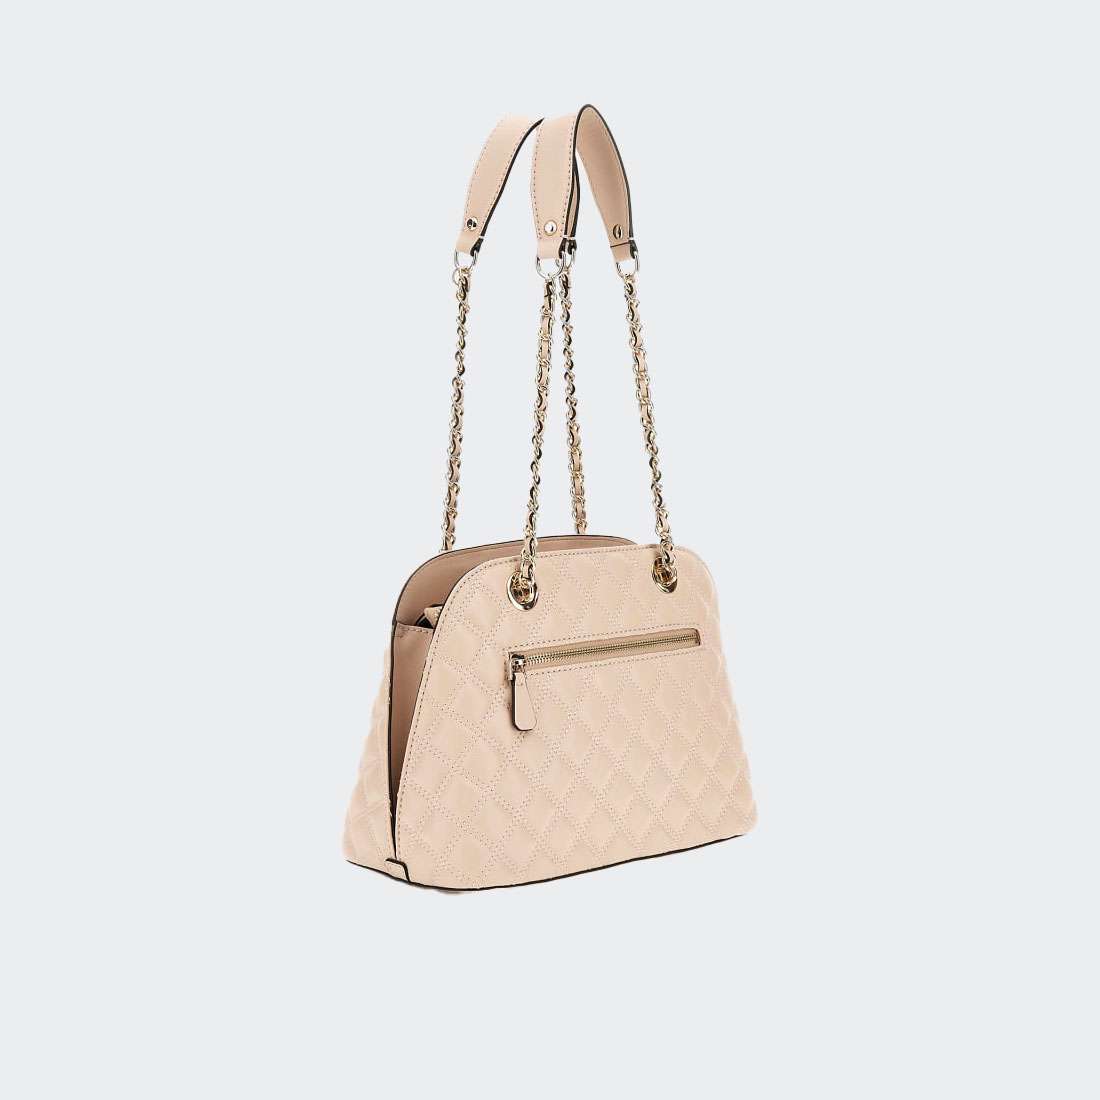 MALA GUESS N GIULLY DOME SATCHEL LIGHT BEIGE